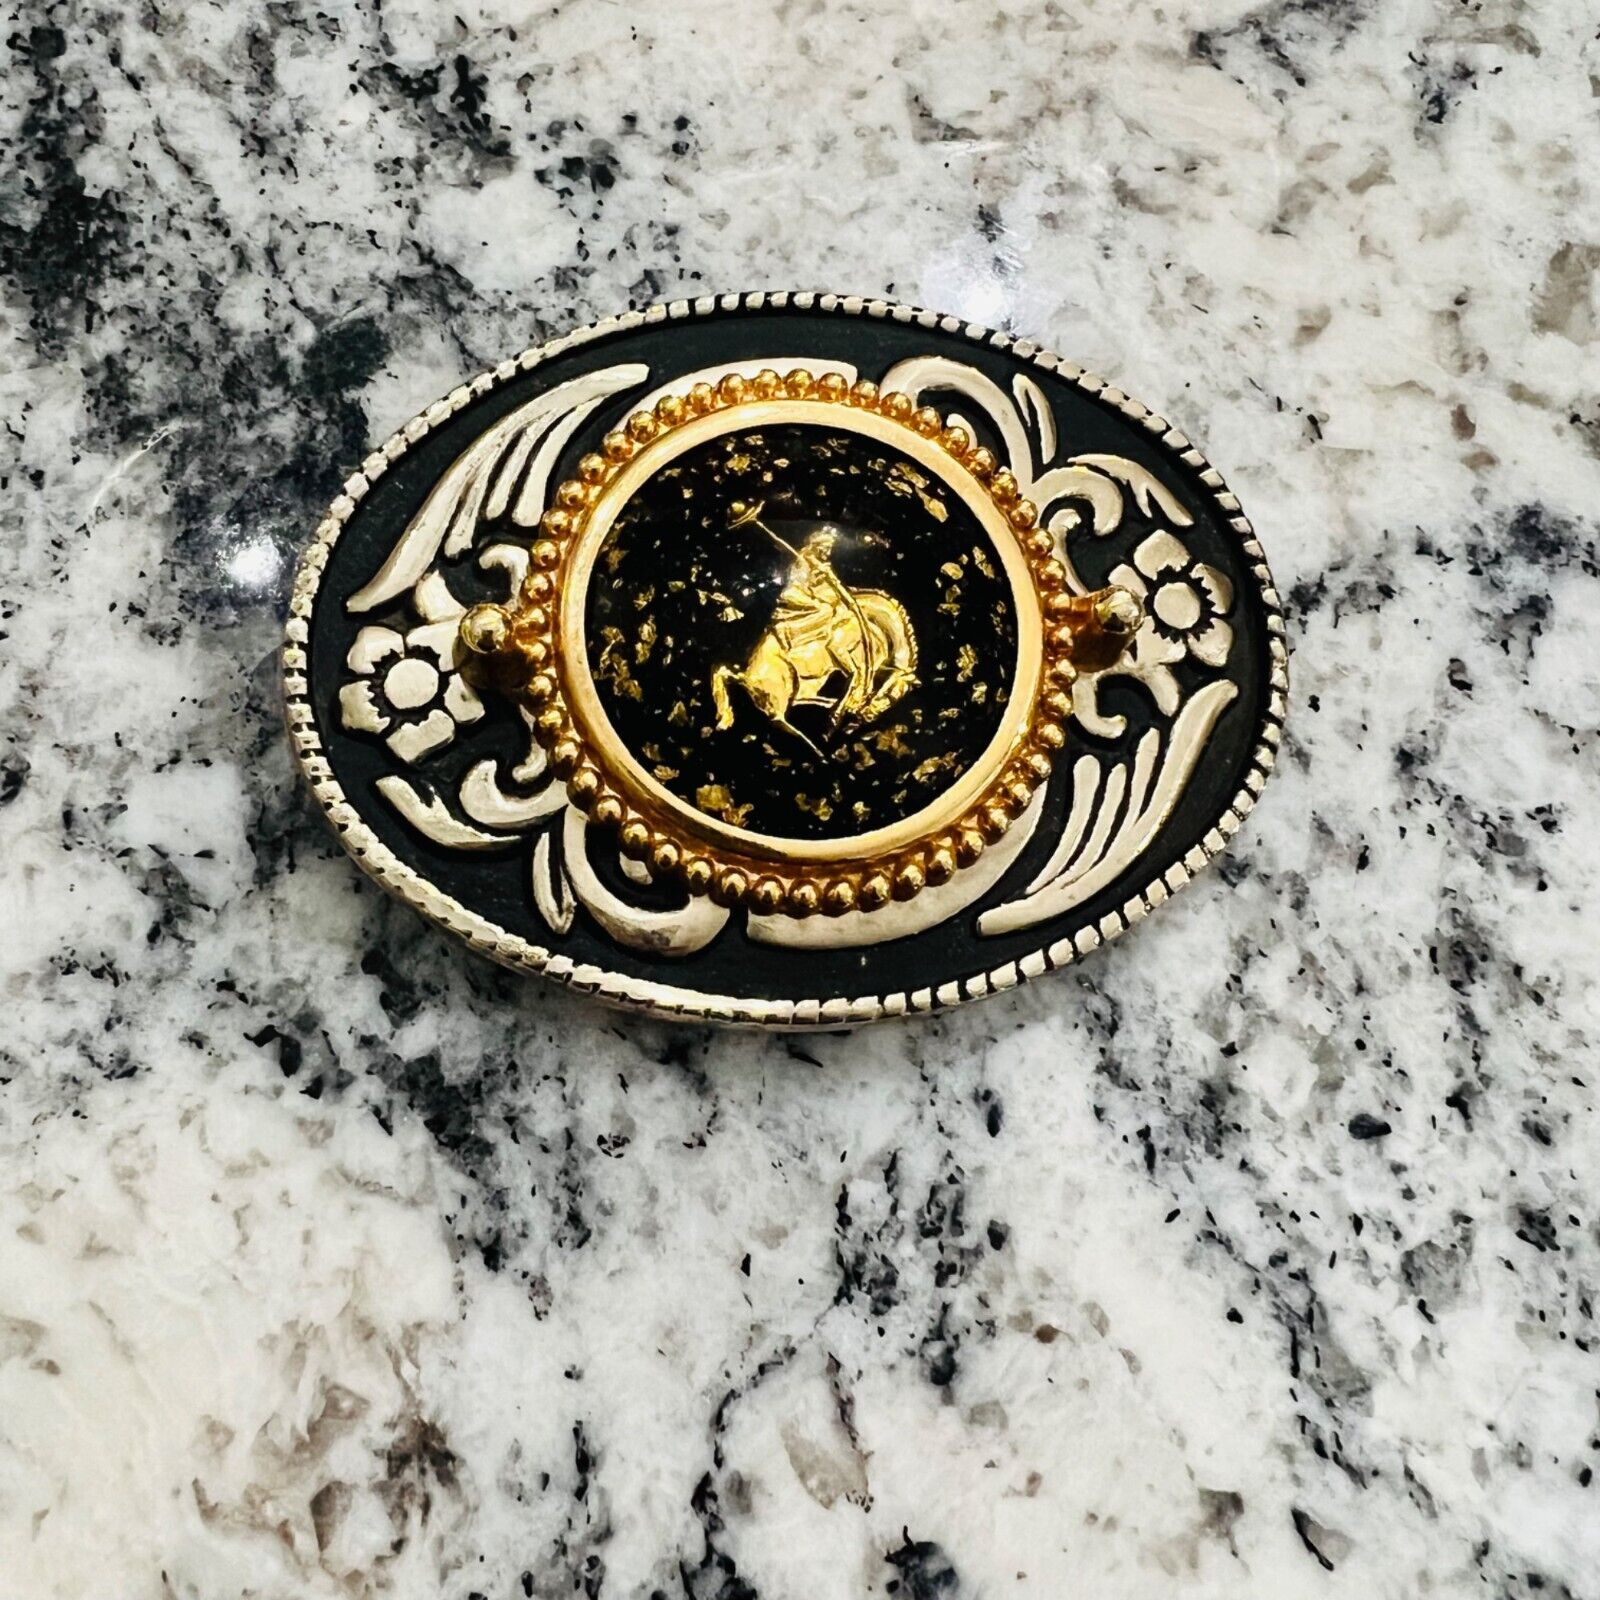 Vintage Bucking Bronco Horse Oval Belt Buckle Made in USA